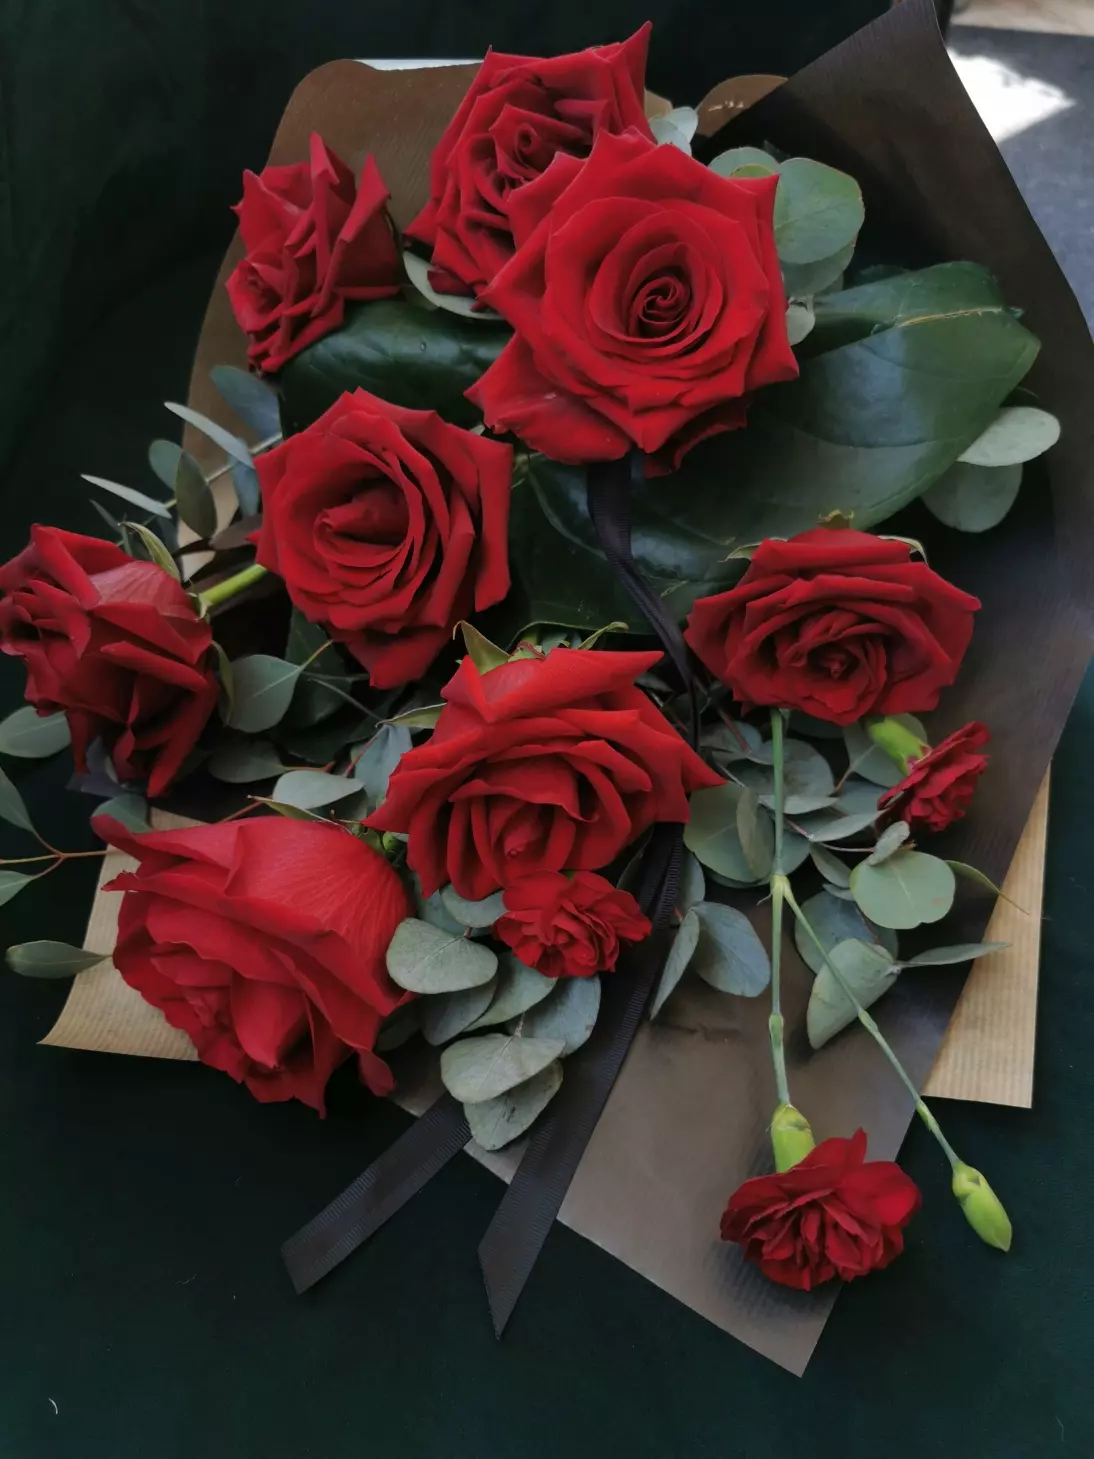 An elegant, minimalist form of bouquet. Roses of large, strong in colour and size surrounded by eucalyptus greenery and black paper with a symbolic ribbon.